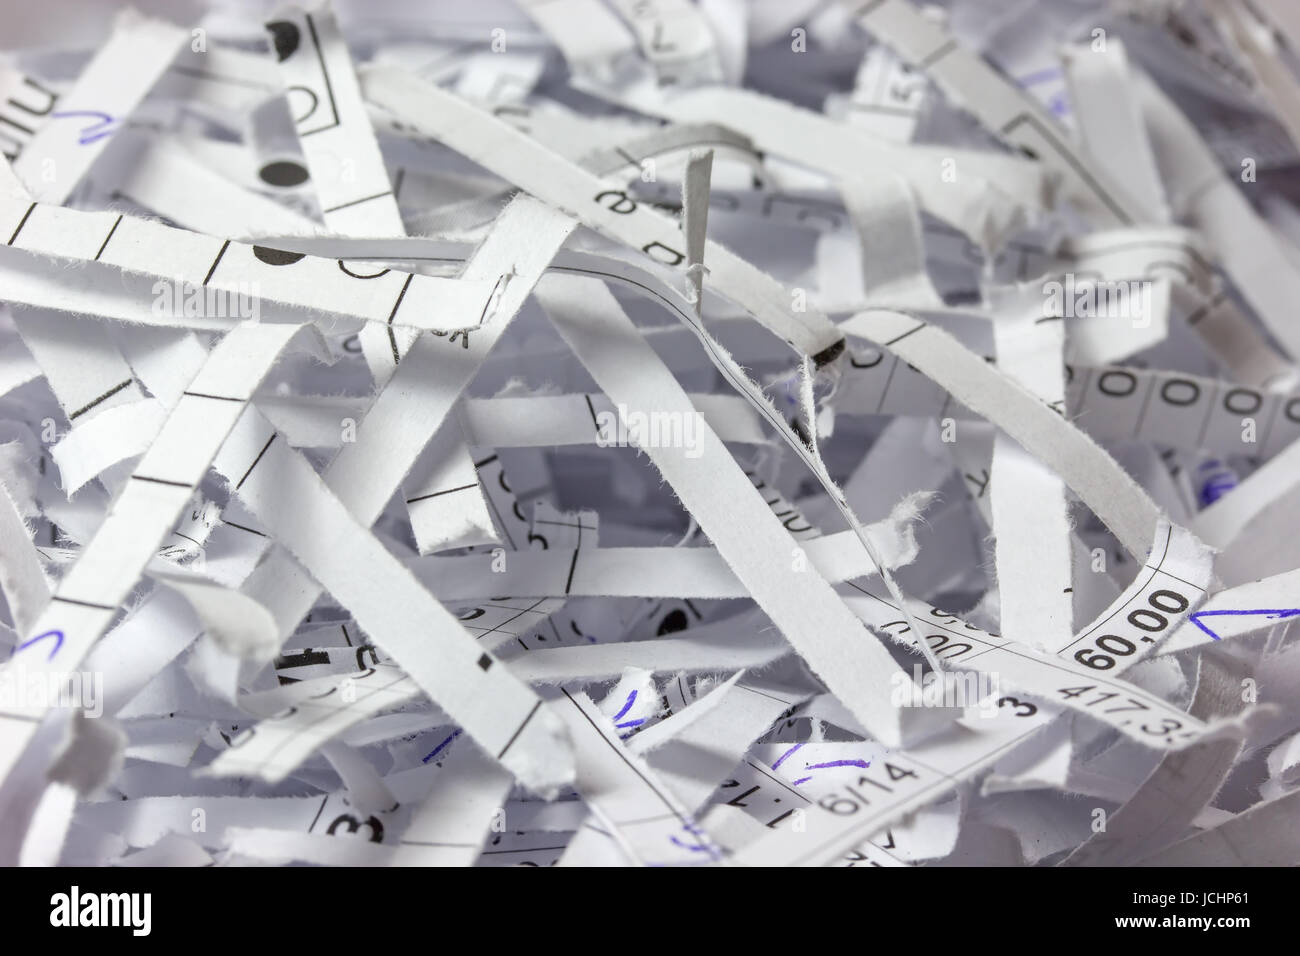 Closeup view of the shredded accounting. Stock Photo